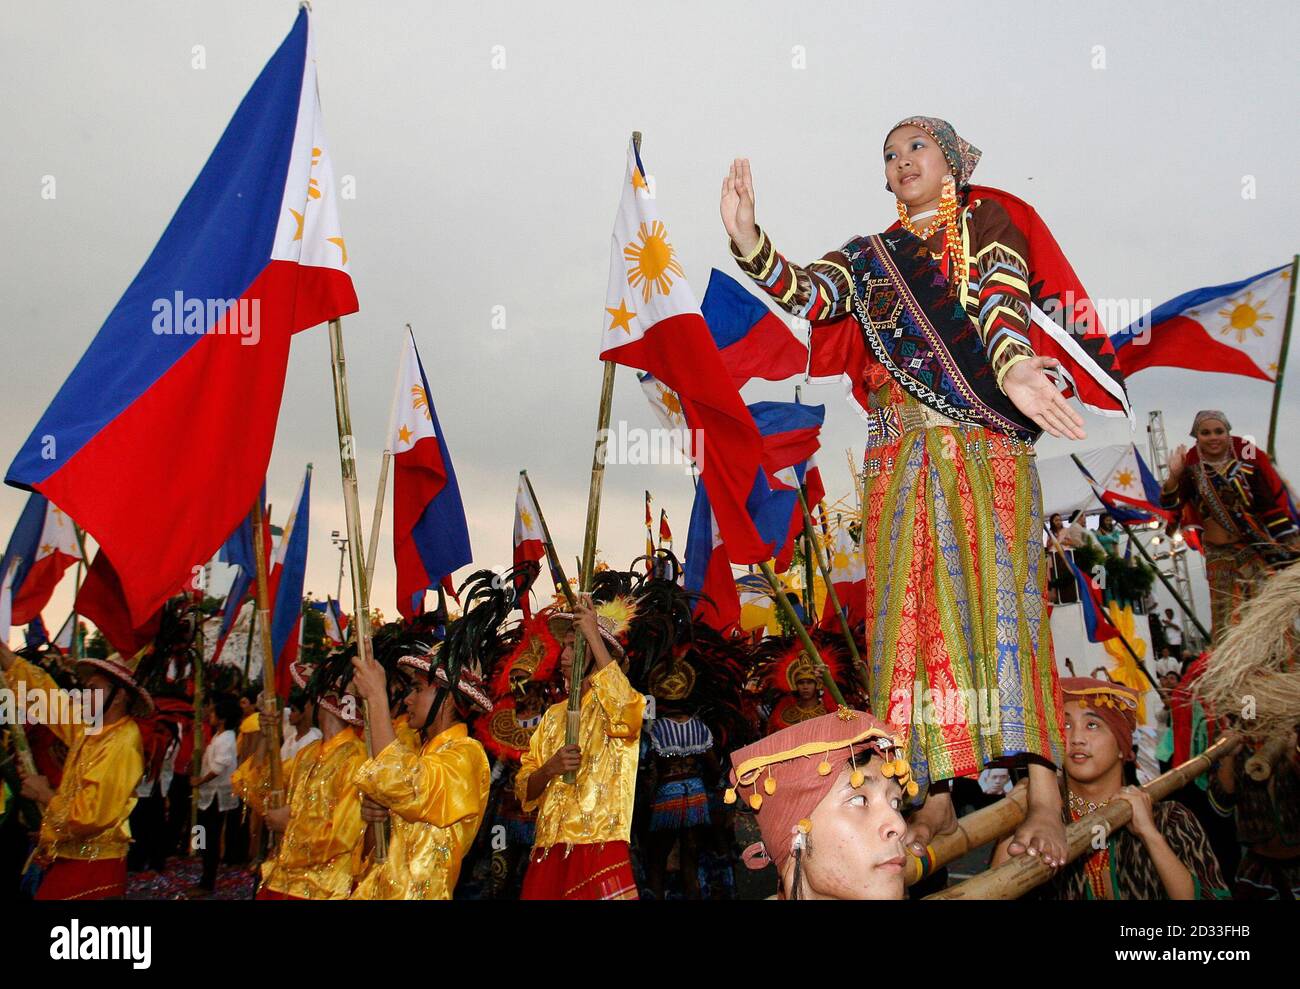 Performers Dance As They Hold Philippine Flags During The Independence Day Celebrations At The Quirino Grandstand In Manila June 12 10 Philippines Marked The 112th Anniversary Of The Proclamation Of Philippine Independence